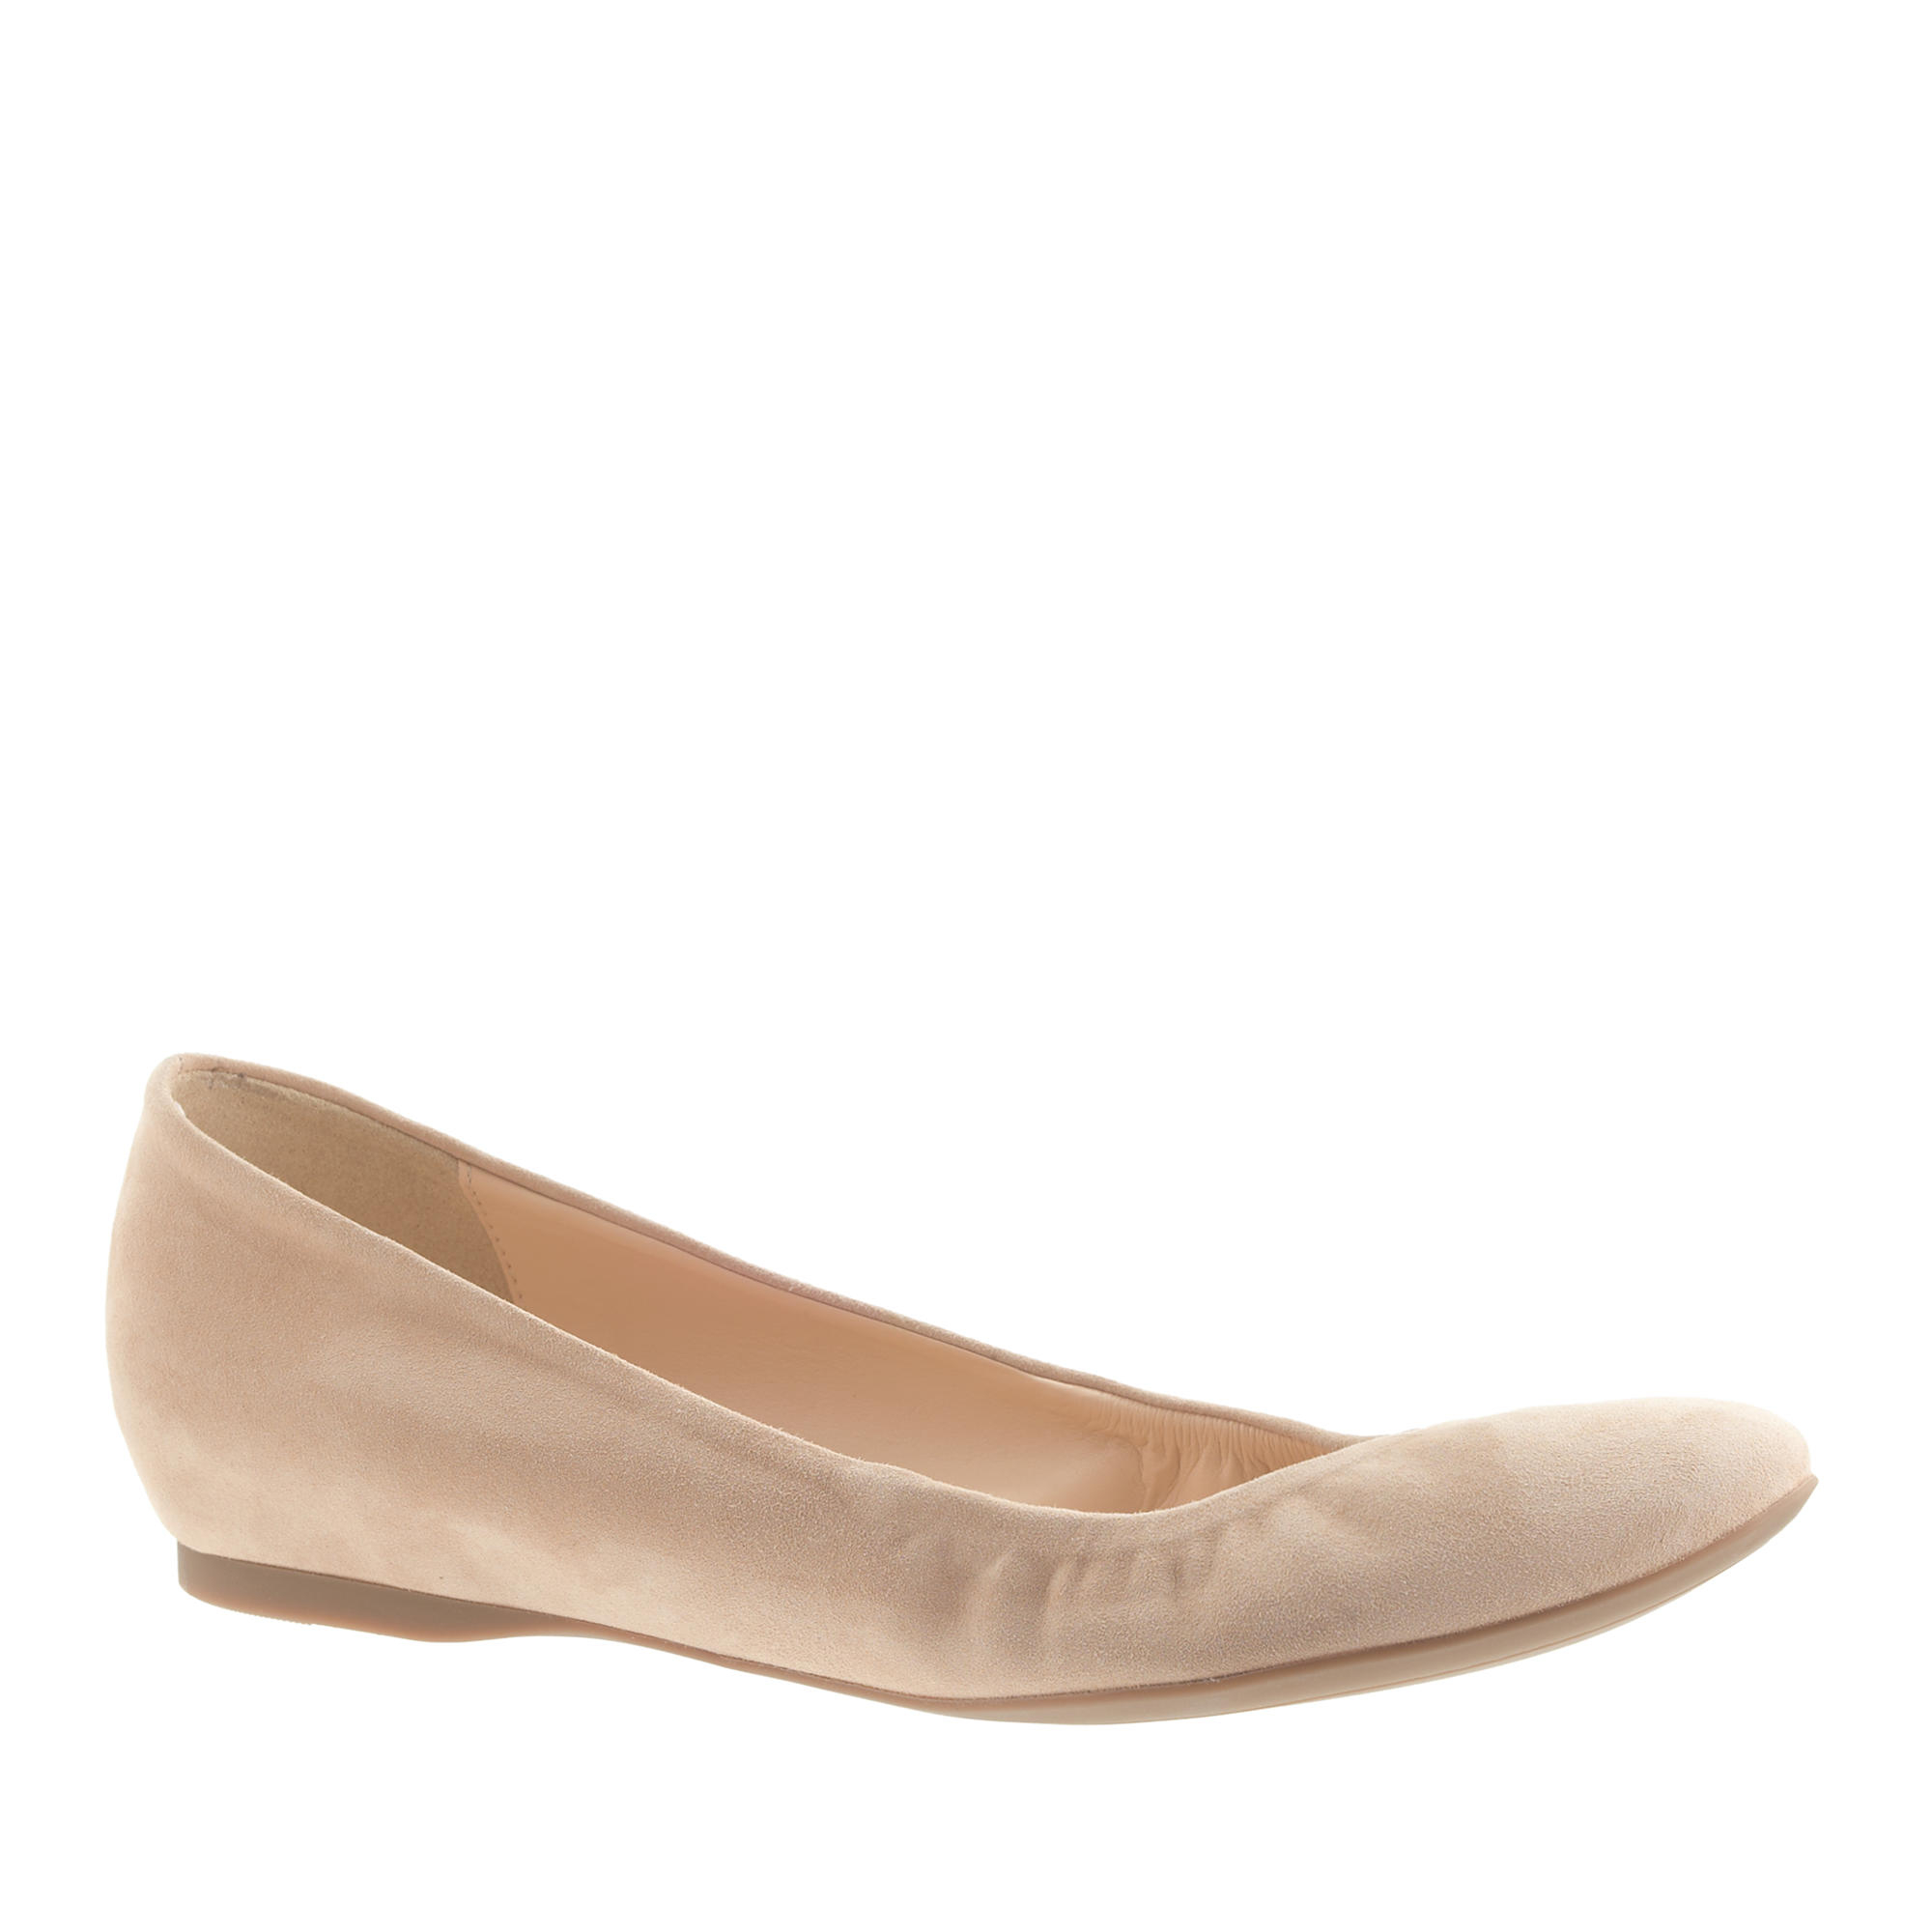 J.crew Cece Suede Ballet Flats in Natural | Lyst